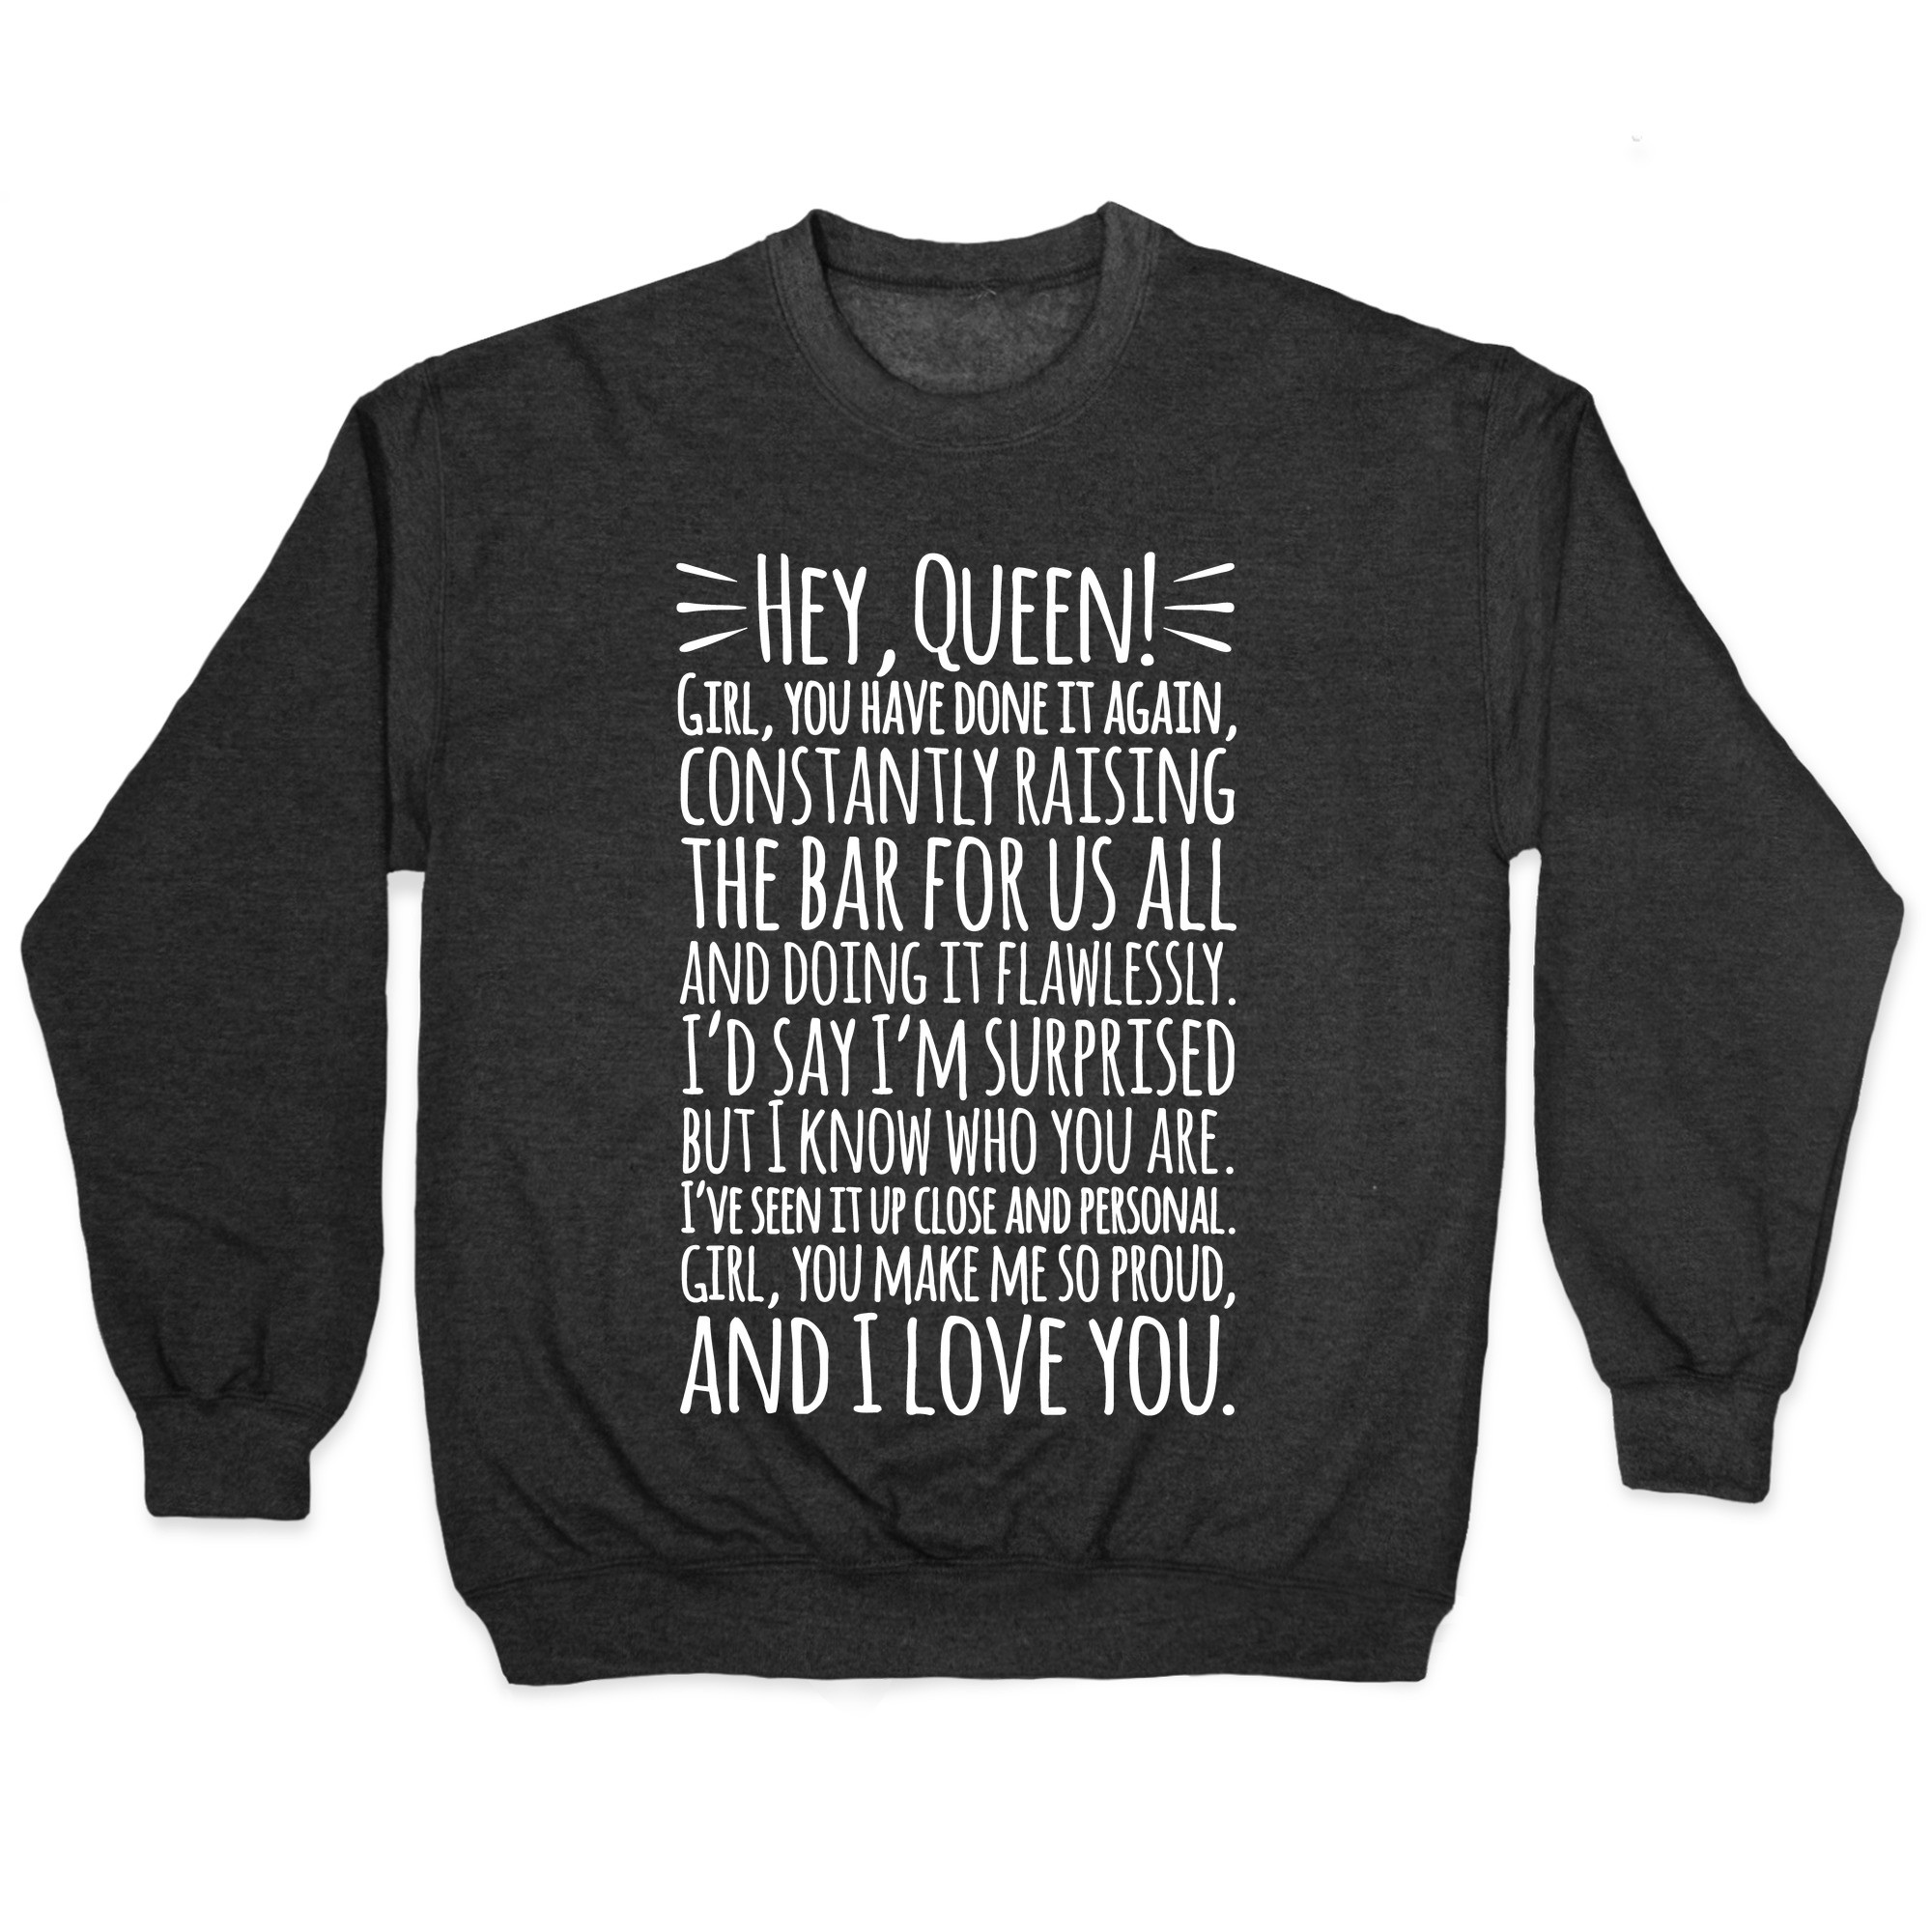 Hey Queen Michelle Obama Quote White Print Pullovers Lookhuman